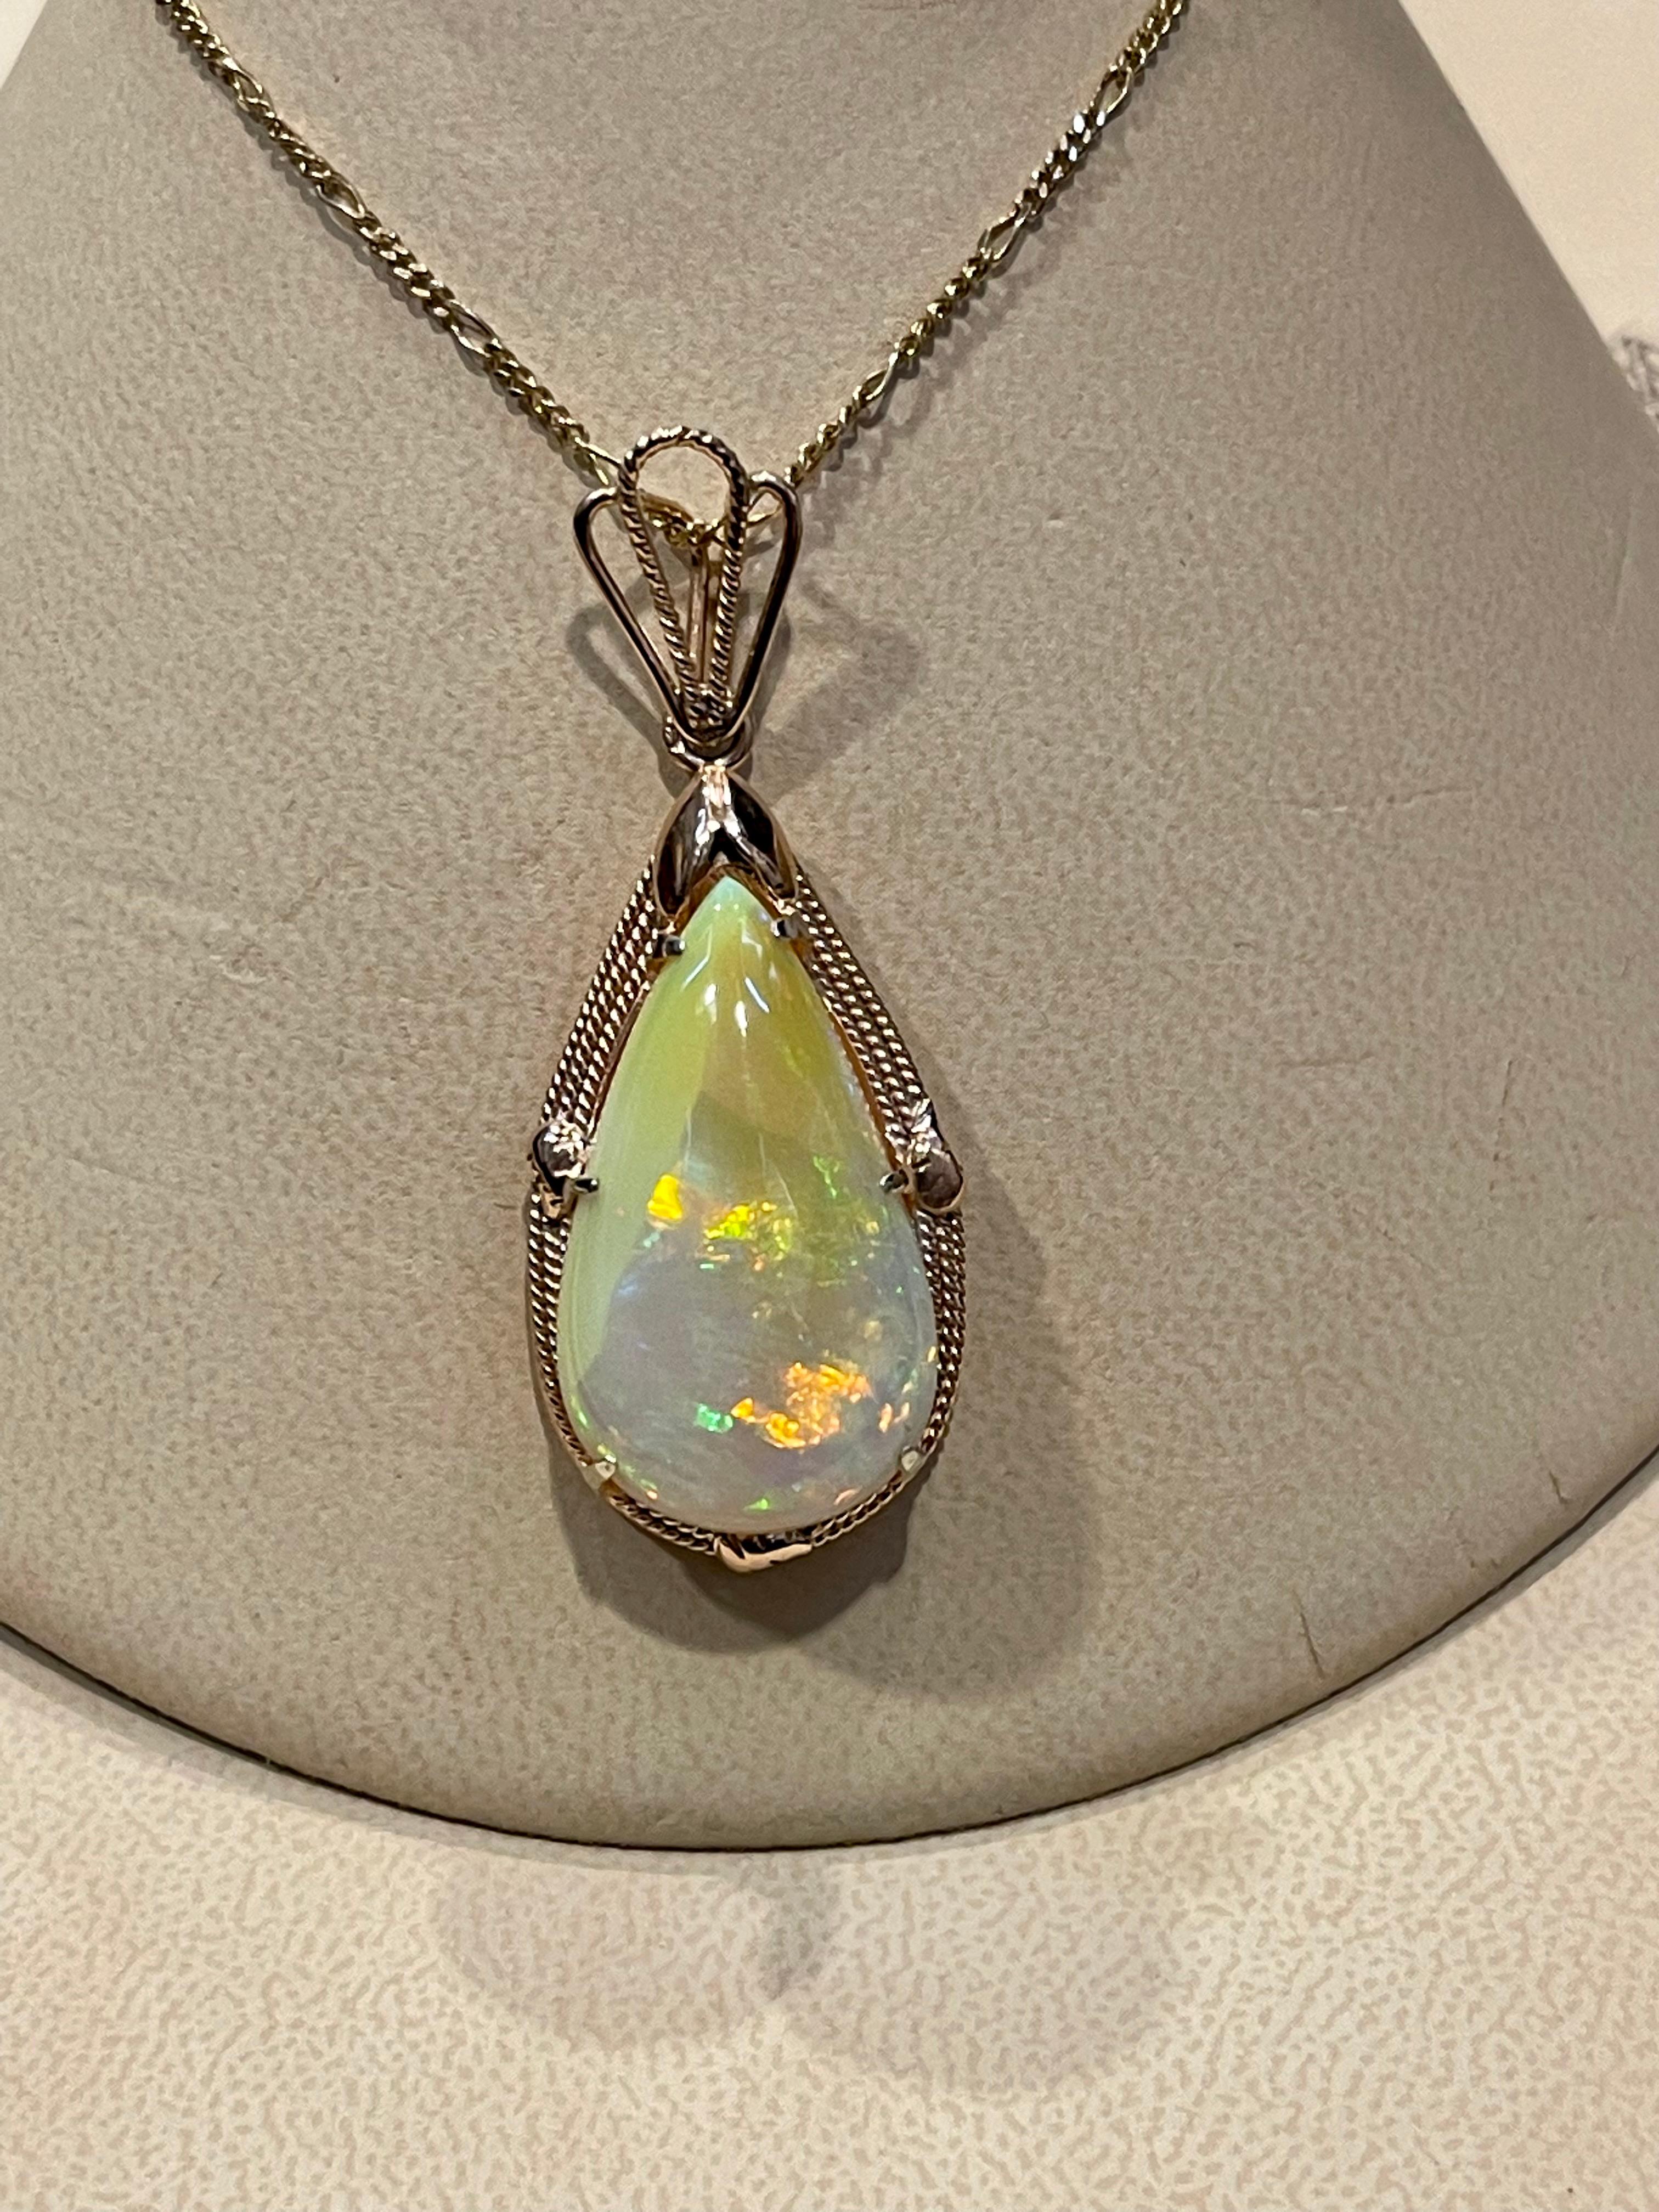 18 Carat Pear Ethiopian Opal  Pendant / Necklace 14 Karat Yellow Gold Estate In Excellent Condition For Sale In New York, NY